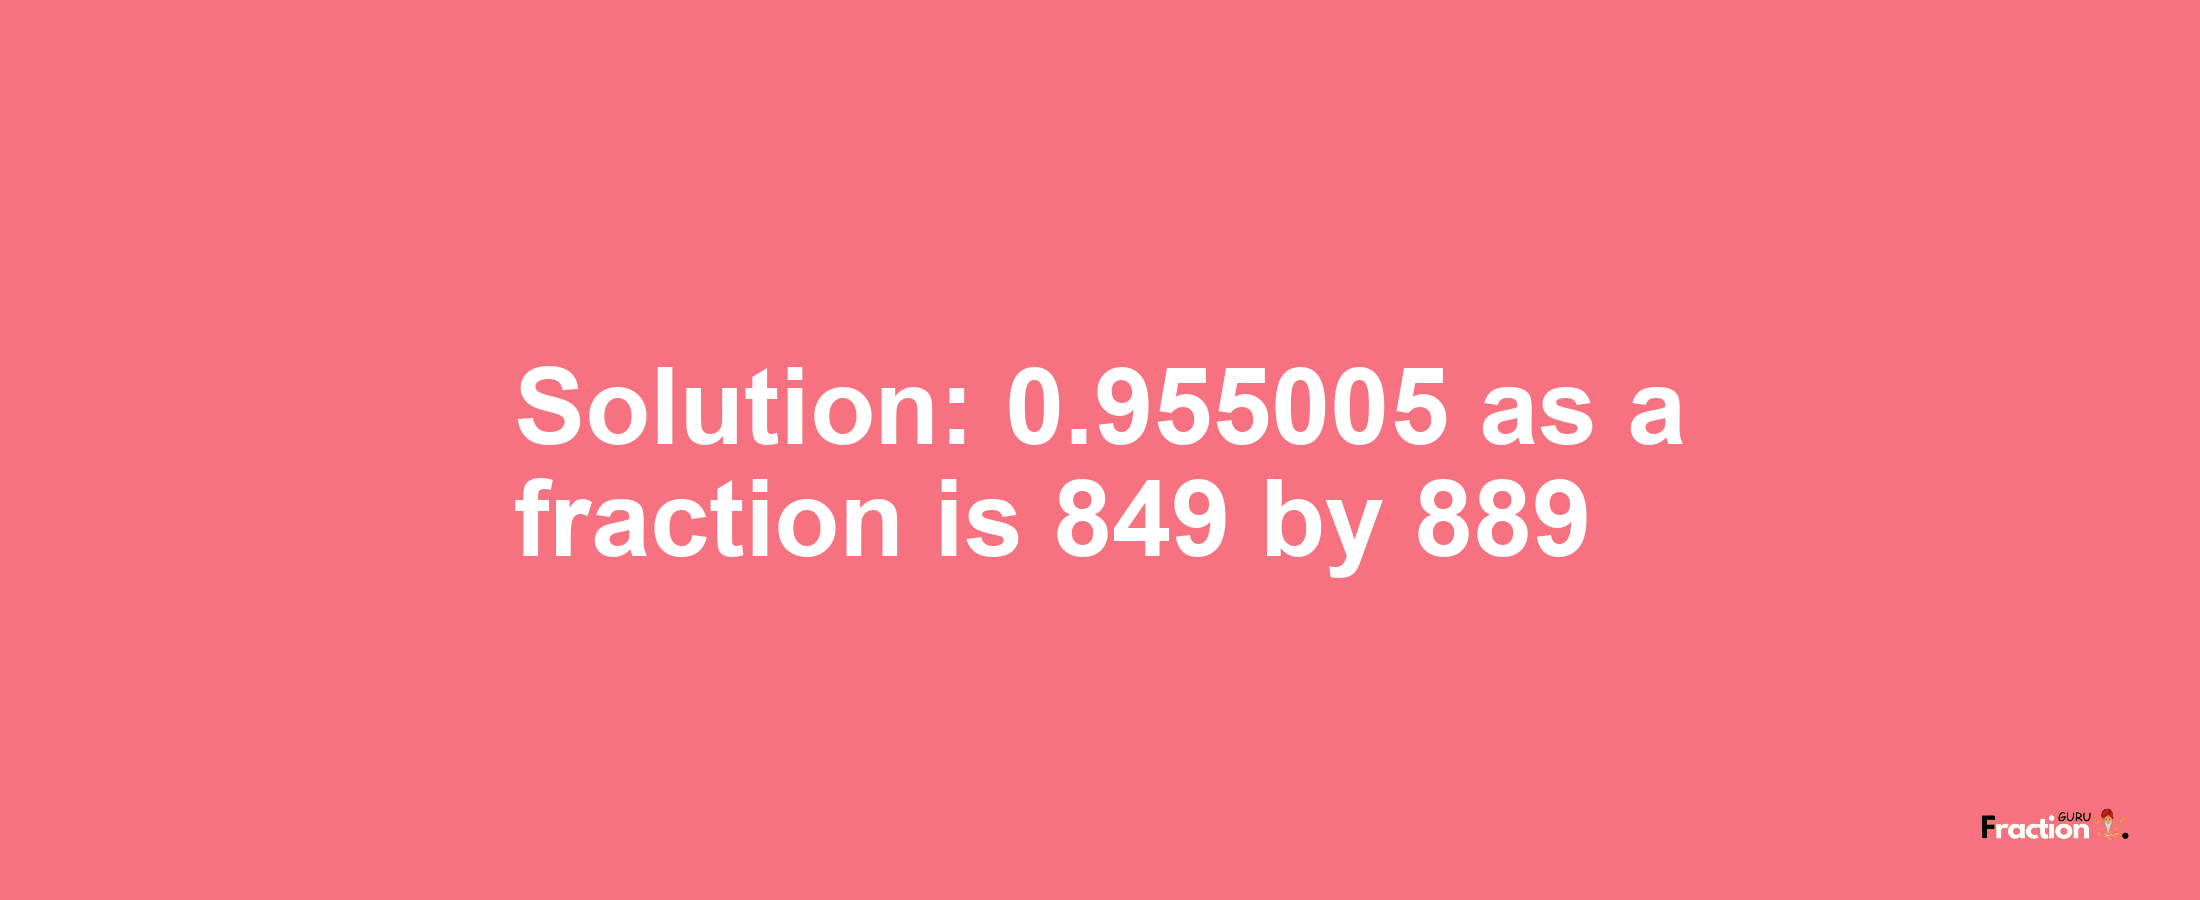 Solution:0.955005 as a fraction is 849/889